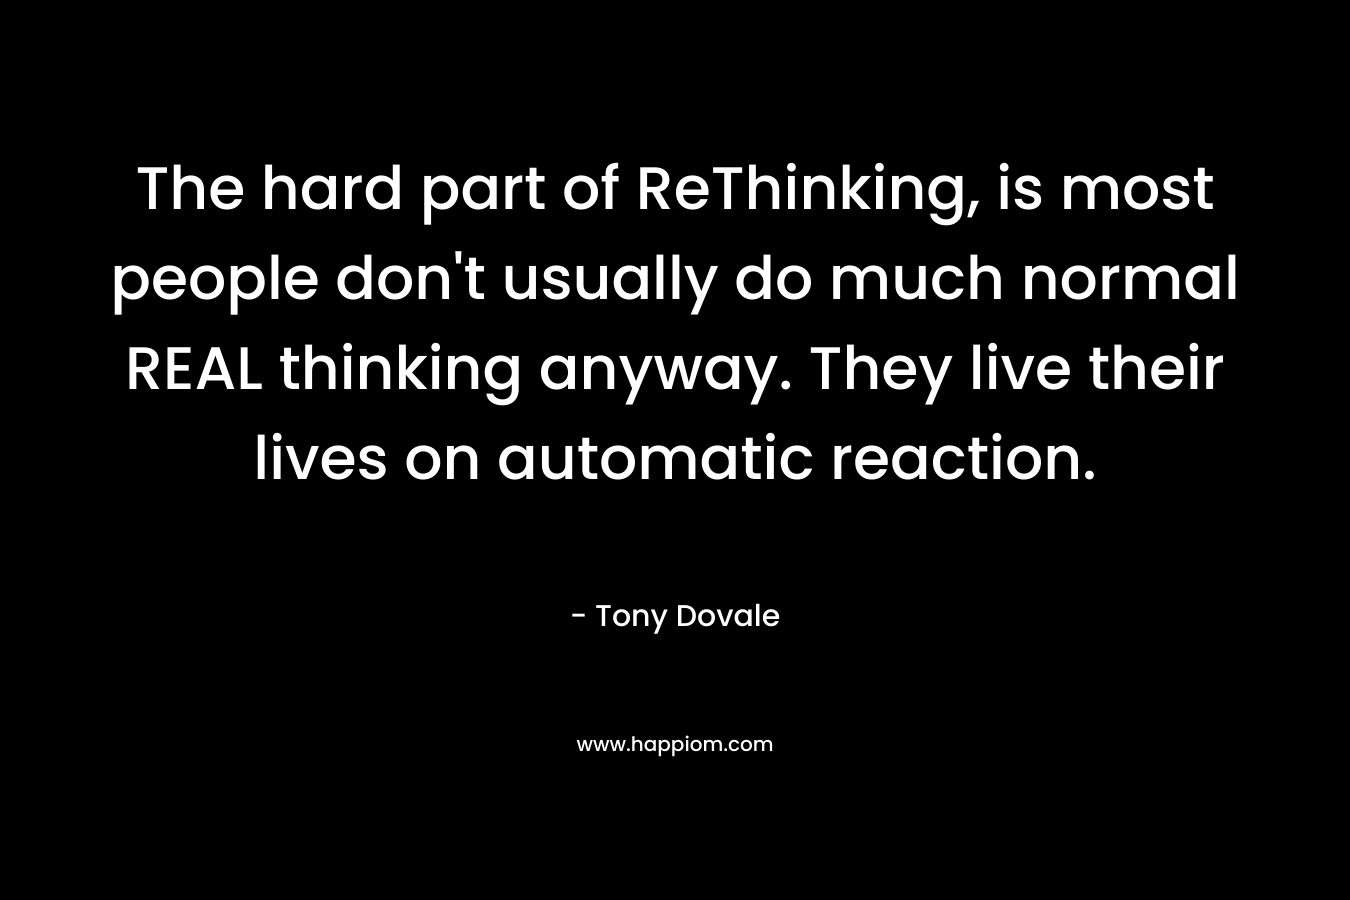 The hard part of ReThinking, is most people don't usually do much normal REAL thinking anyway. They live their lives on automatic reaction.